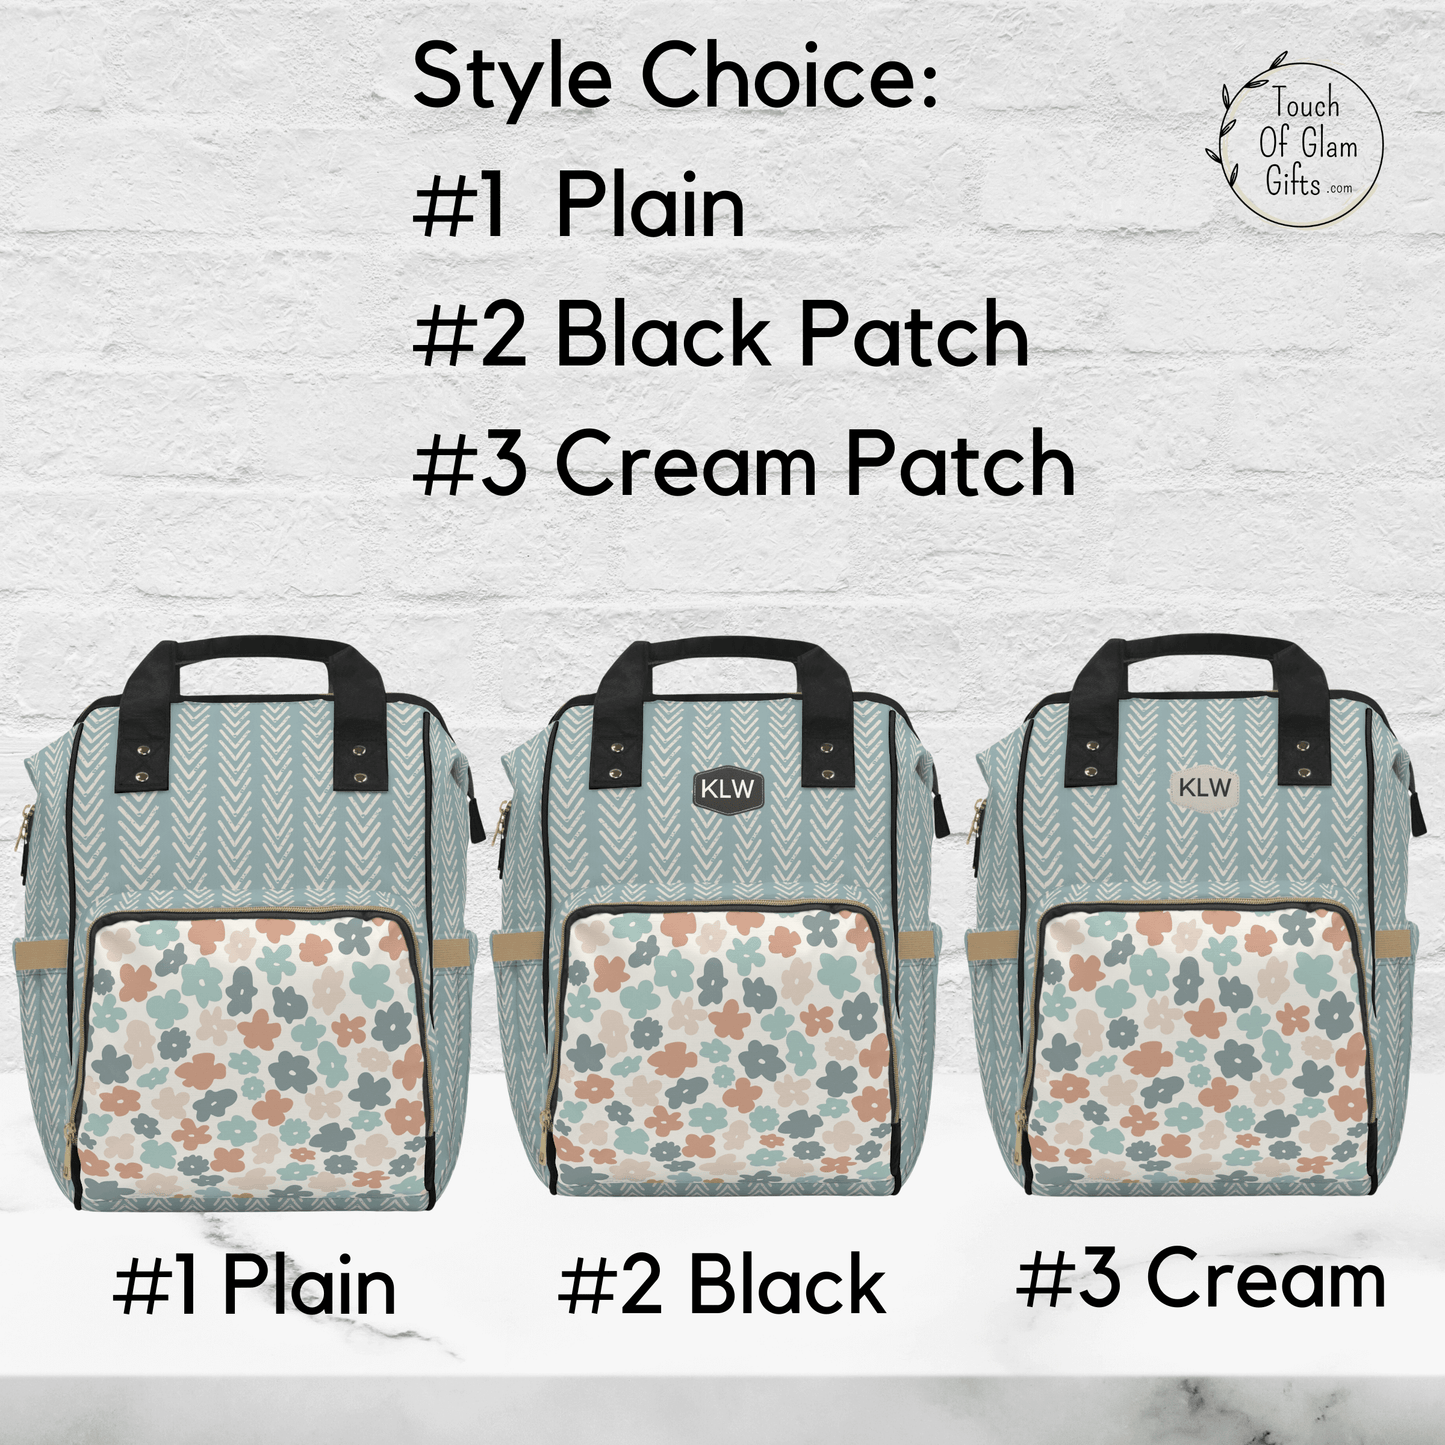 Style choice for personalizing your boho diaper bag are Plain, black patch with white Initials or cream patch with black initials. This custom bag is the perfect gift for new moms.